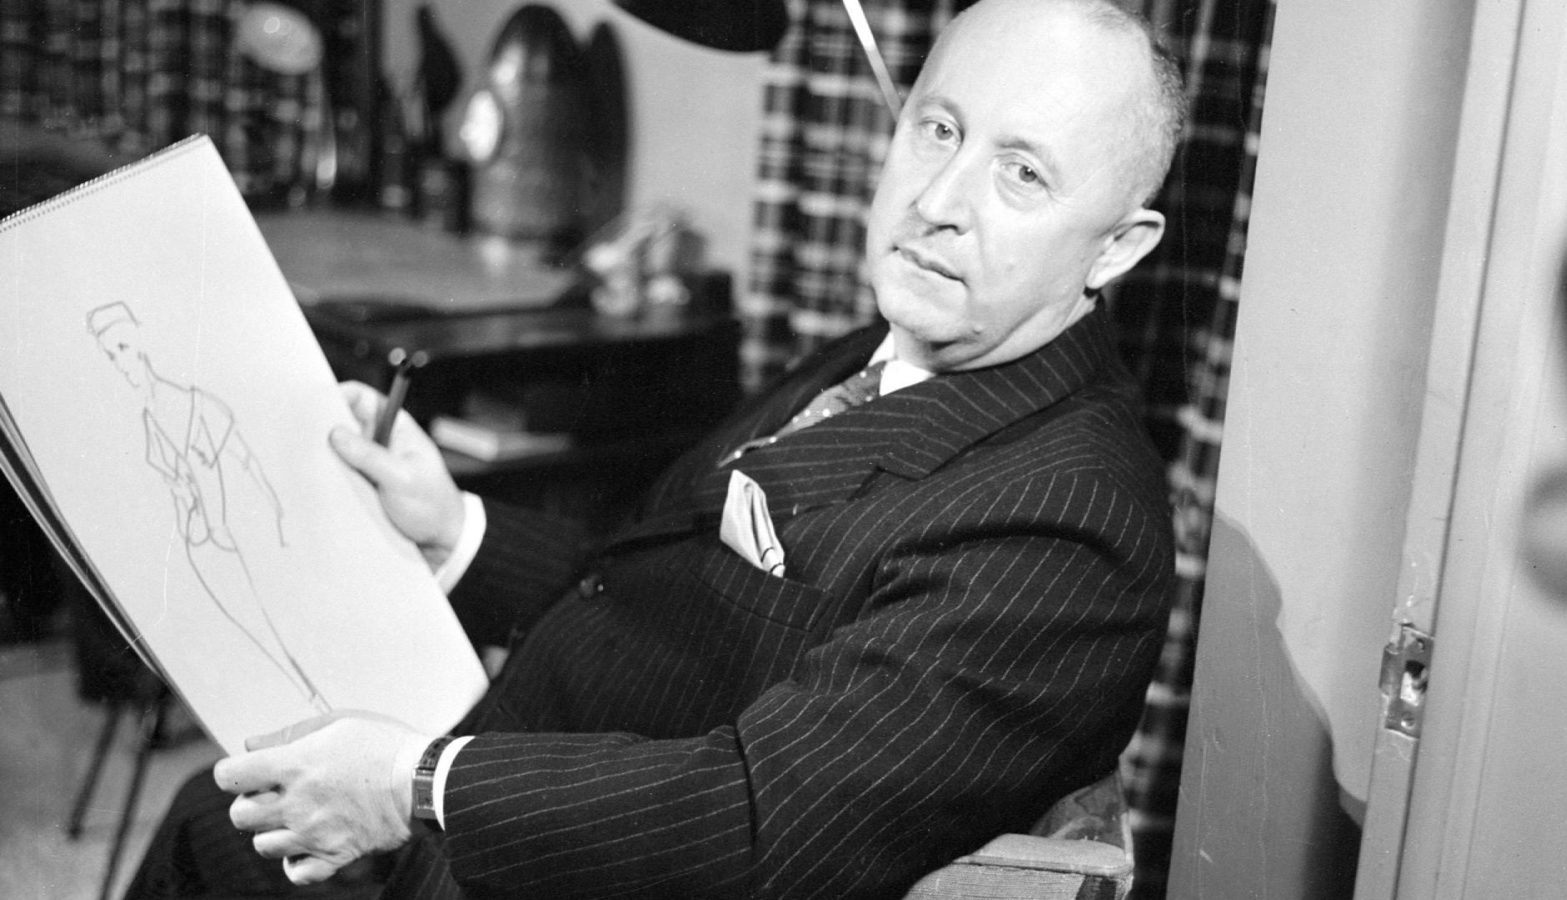 Stream this rare Christian Dior documentary to learn all about his